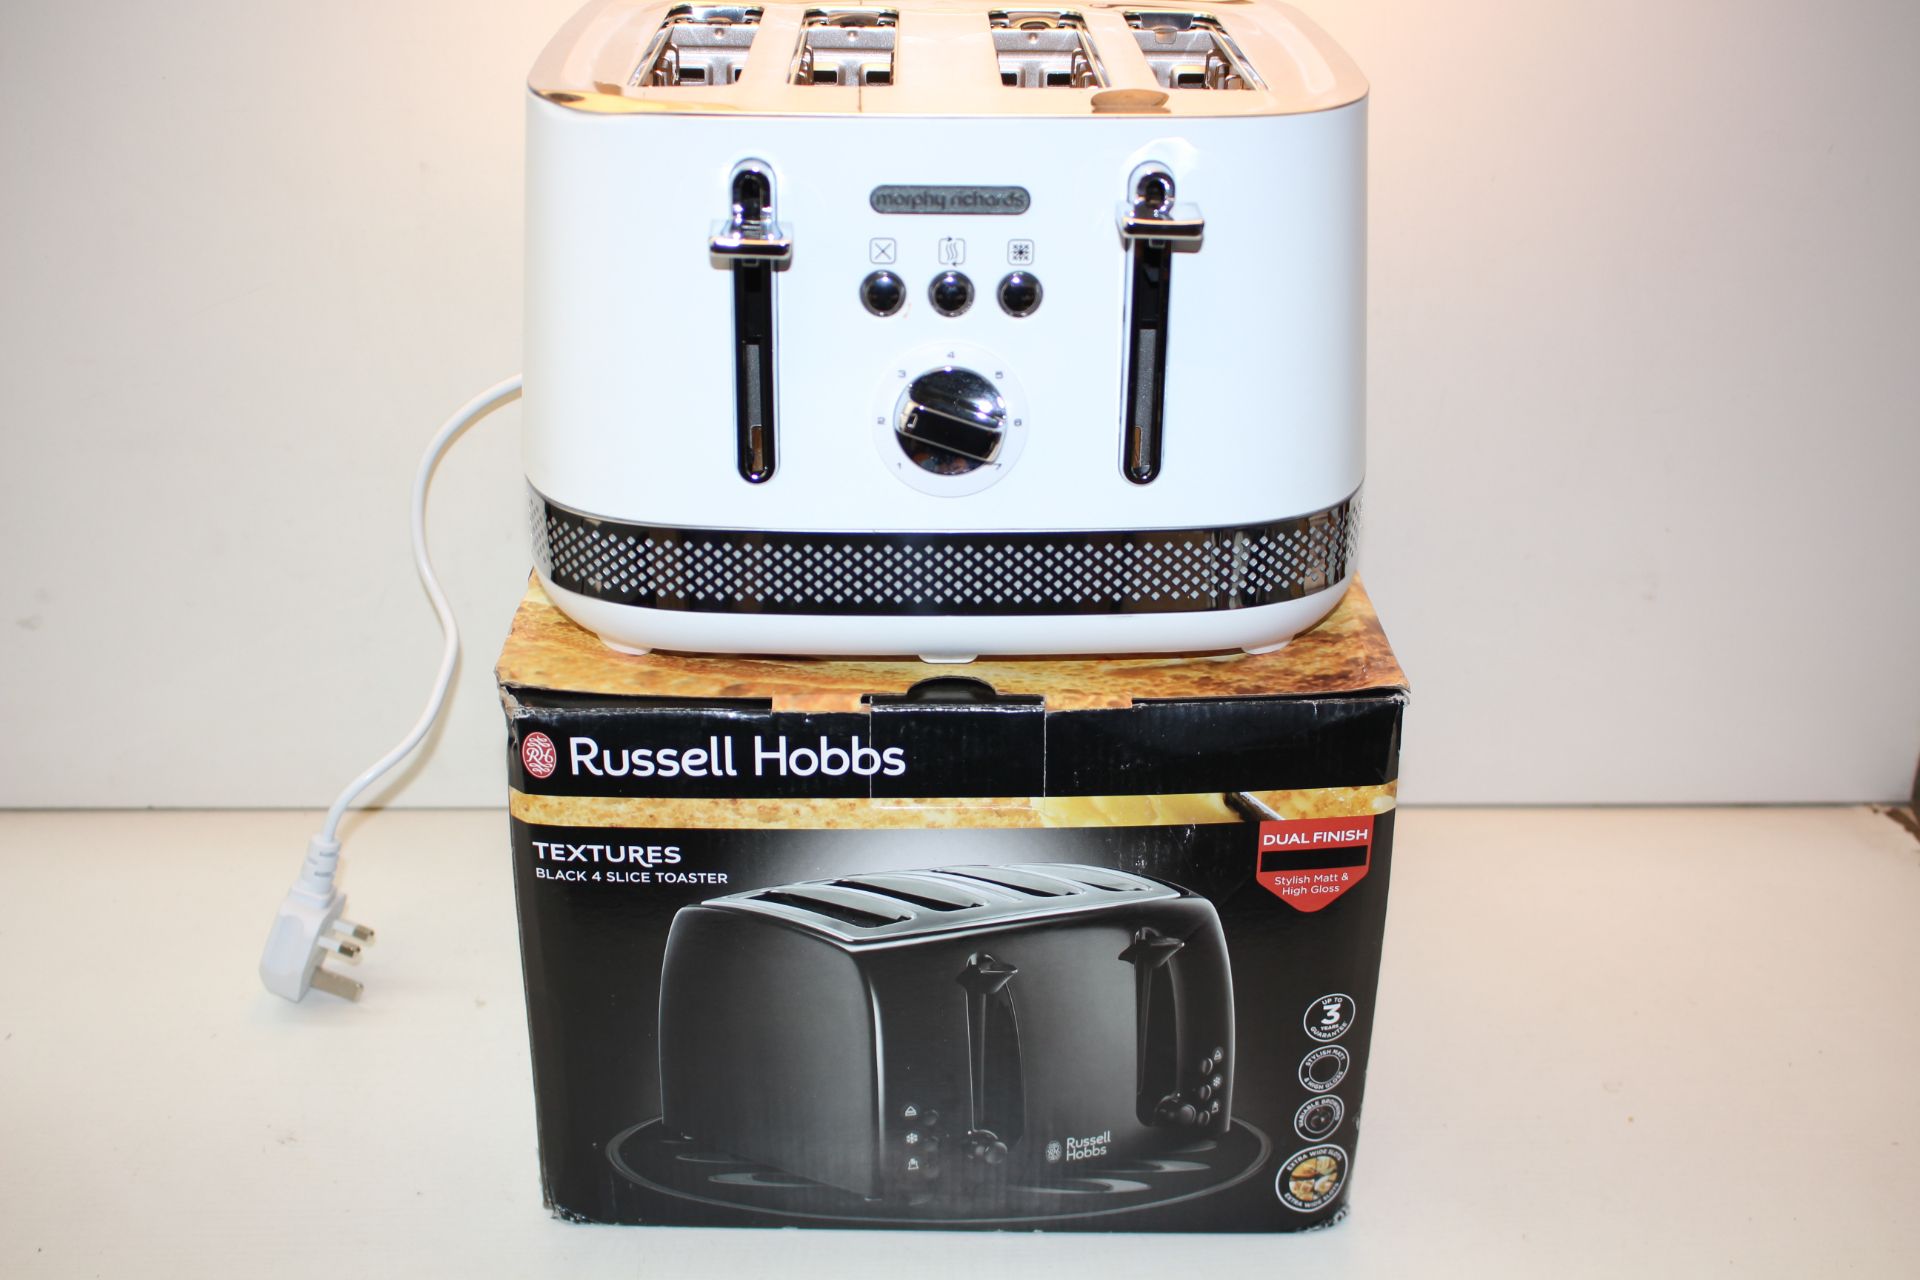 2X BOXED/UNBOXED TOASTERS BY RUSSELL HOBBS & MORPHY RICHARDS (IMAGE DEPICTS STOCK)Condition